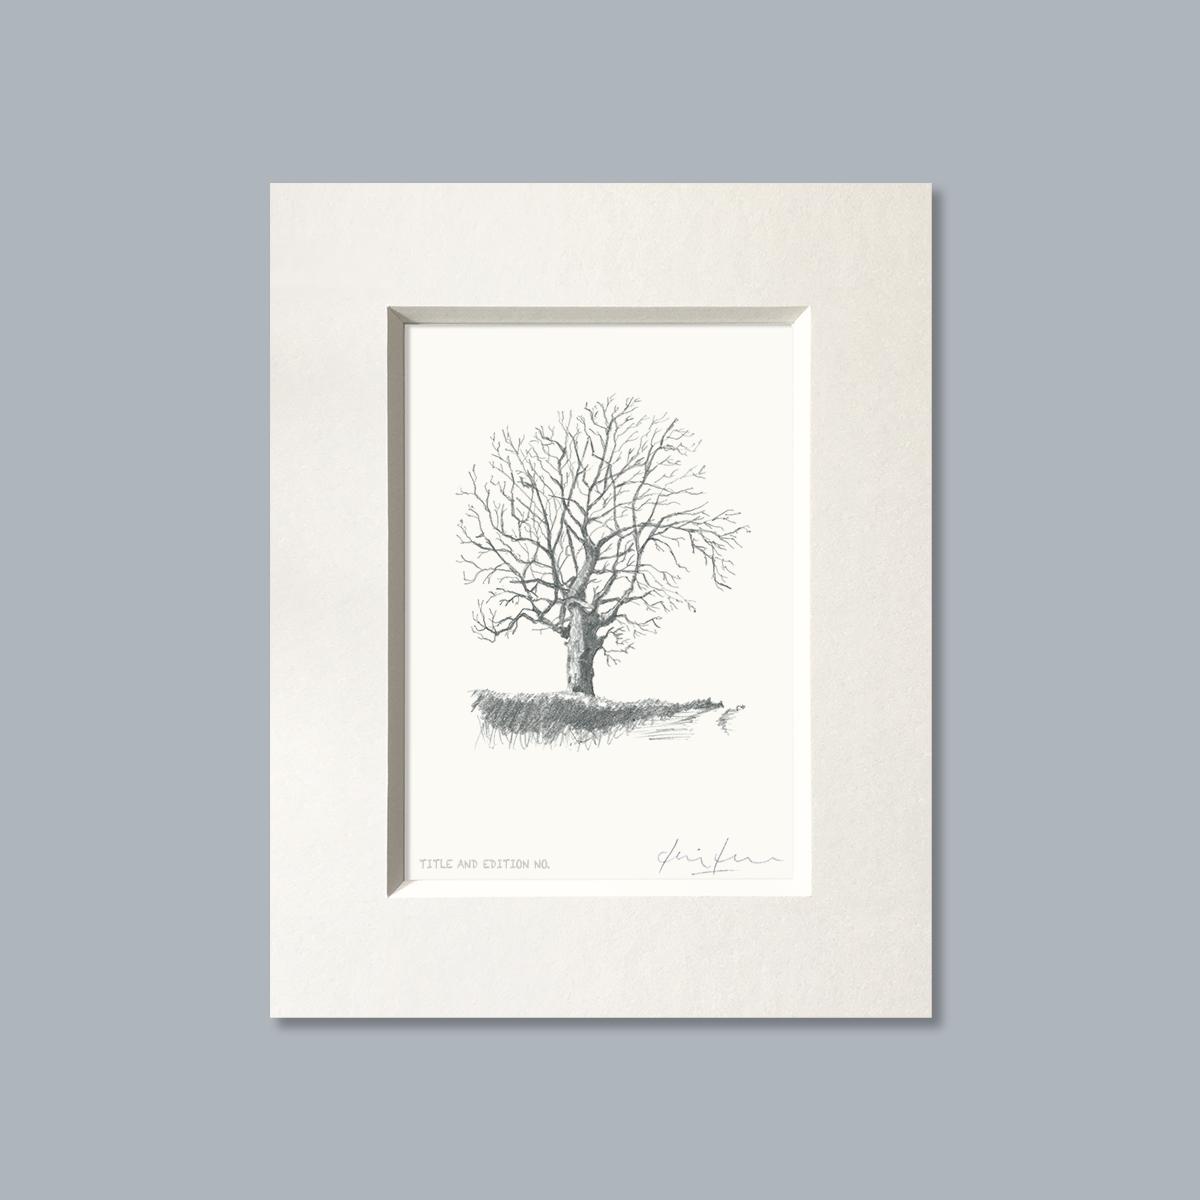 Limited edition print from pencil sketch of a tree in a white mount